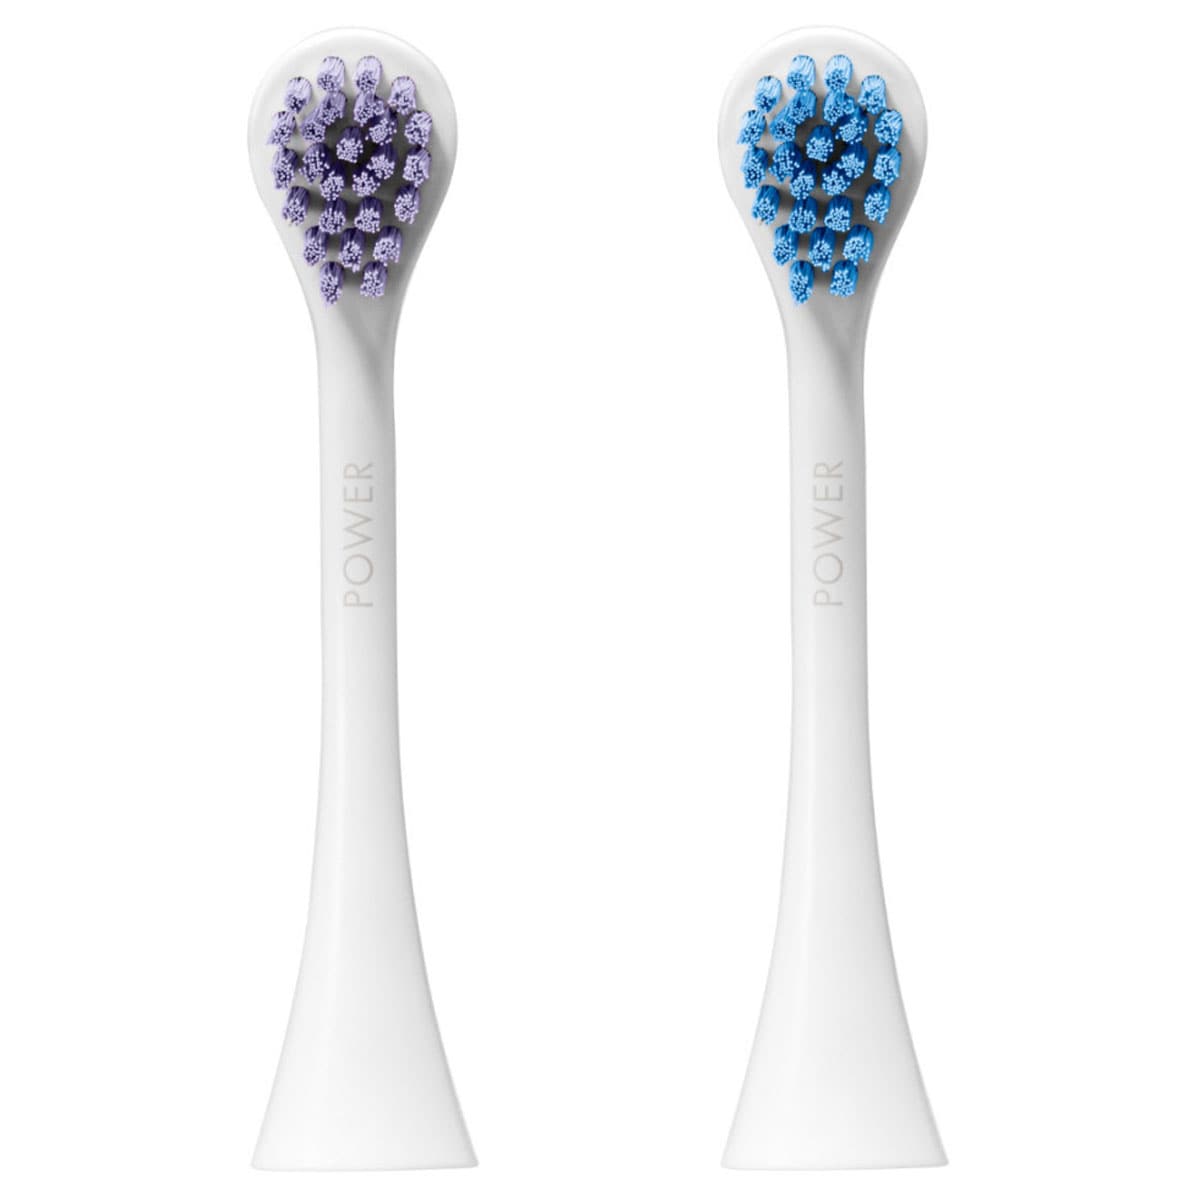 Curaprox Hydrosonic Replacement Power Duo Toothbrush Heads 2 Pack